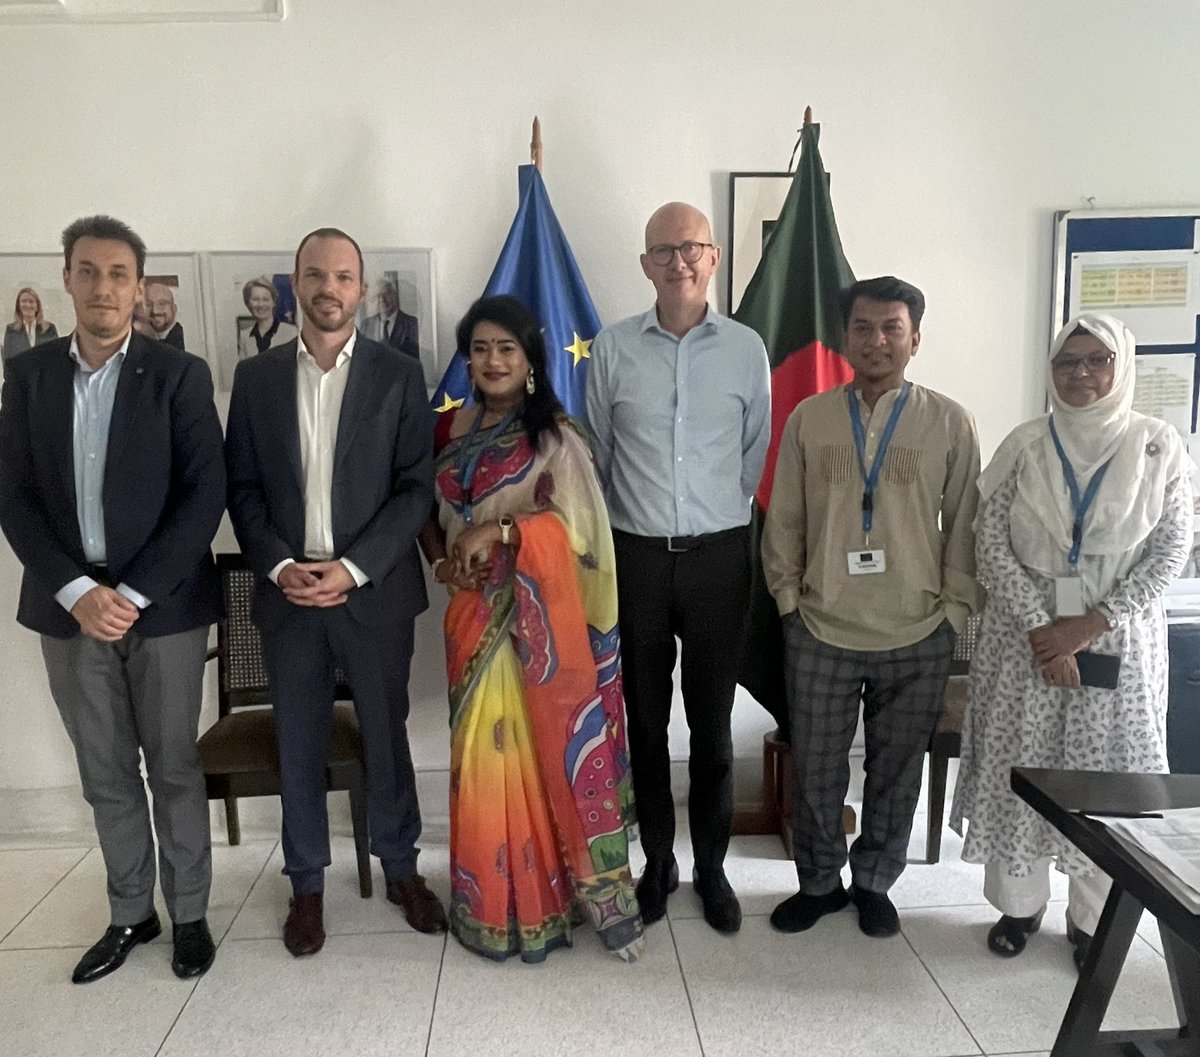 Good to learn more about the work of CBO which brings together 51 organisations across 🇧🇩working for hijra and transgender communities. The 🇧🇩government has taken important steps to support rights in this area - several recent developments underline how vital those endeavours are